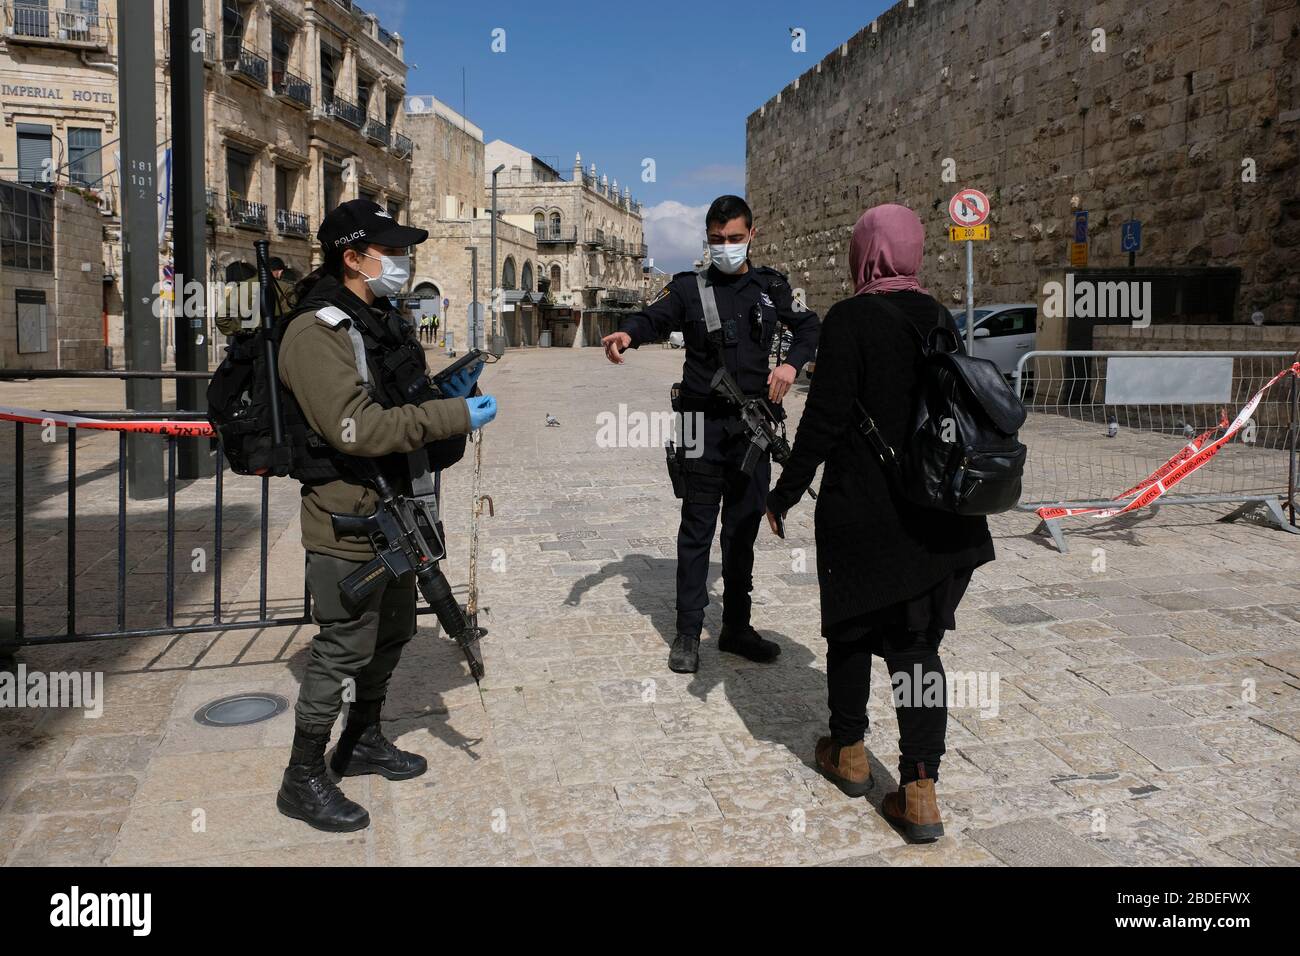 Israeli border police woman wearing protective mask checking ID of an Israeli Arab woman in a checkpoint placed in the old city of  Jerusalem during the outbreak of the coronavirus disease (COVID-19) in Israel. Stock Photo